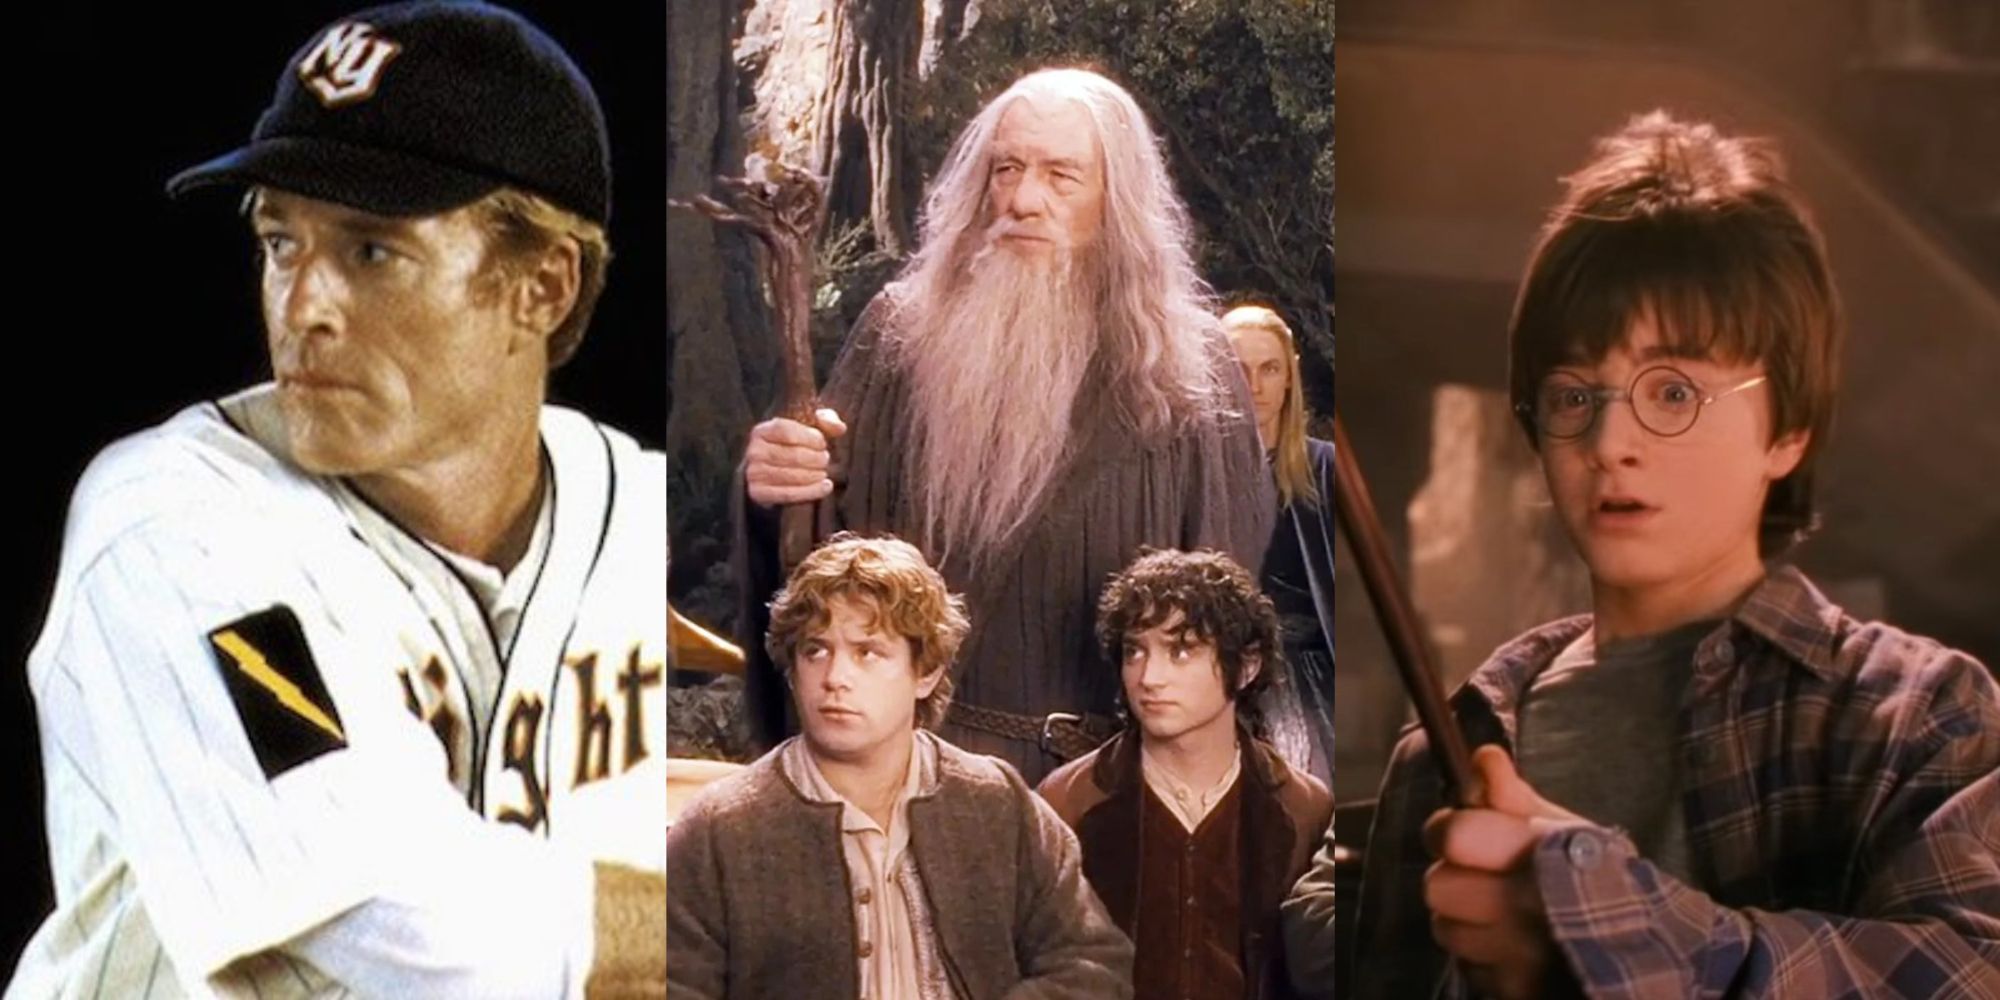 Split Image of Robert Redford in The Natural, Gandolf and Bilbo, Harry Potter with a wand